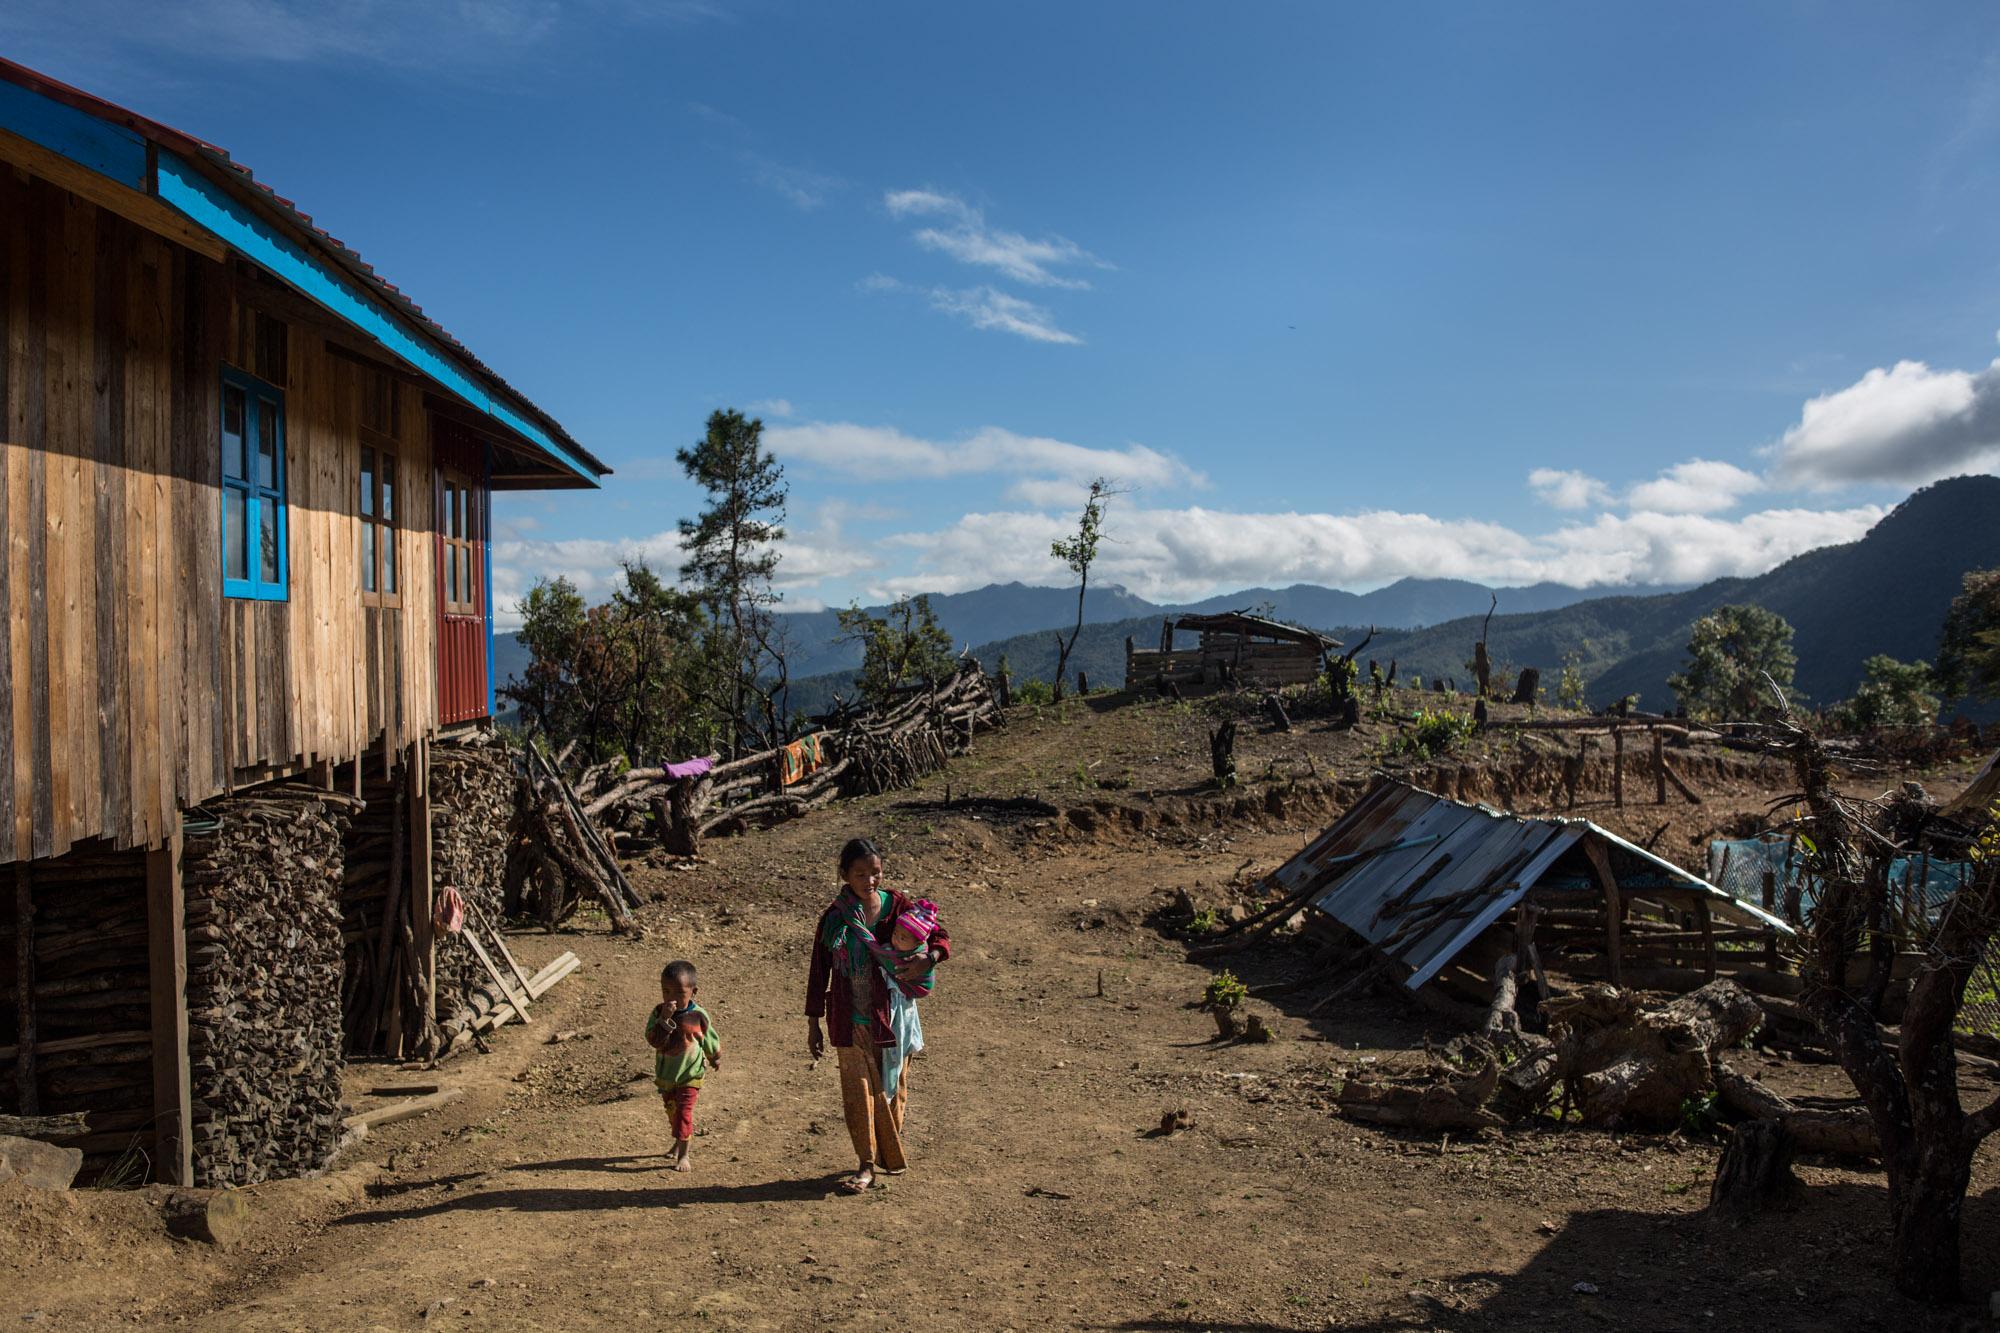 A mother and her two daughters walk through their village in rural Chin state, Myanmar, November 2015.